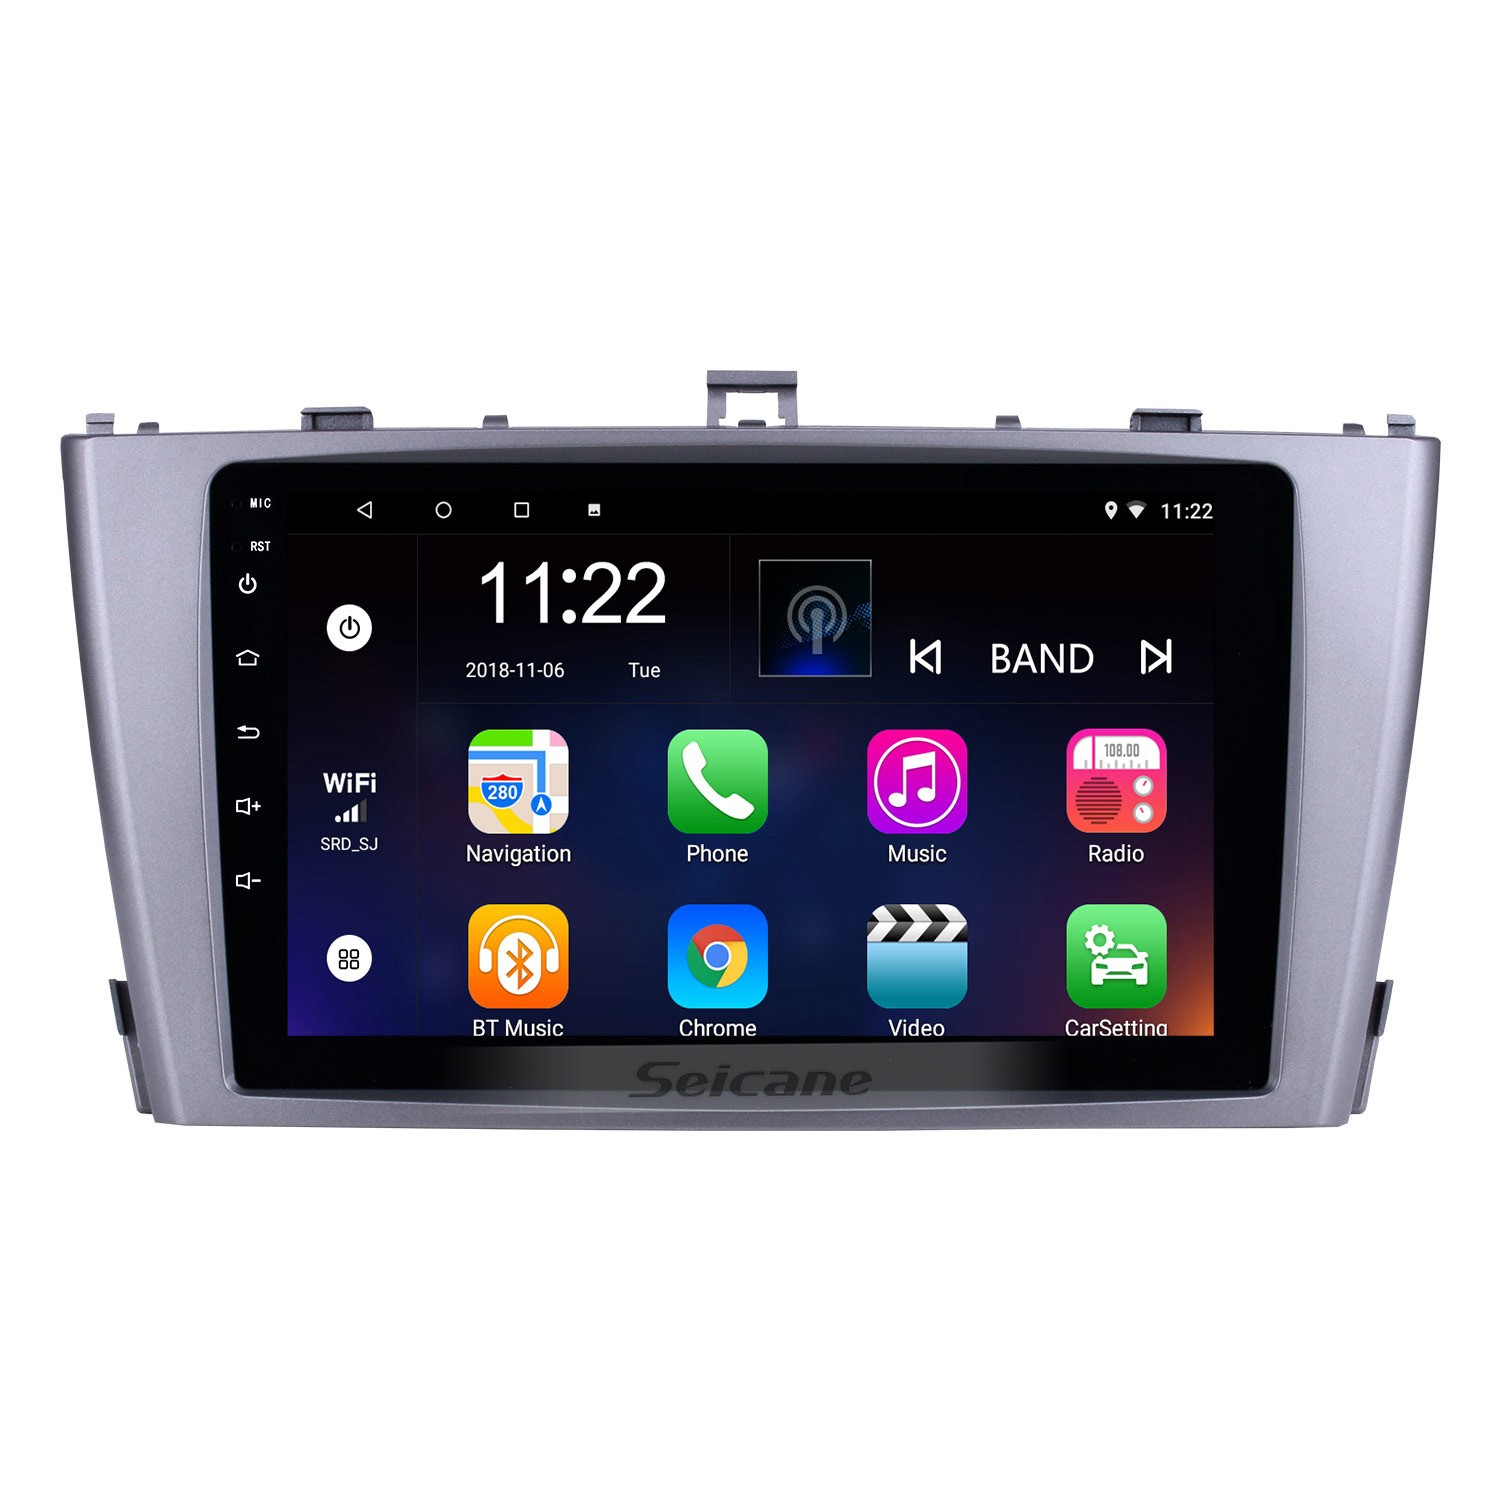 13.0 Bluetooth Mirror Touchscreen Wifi support GPS Android inch for AVENSIS 2009-2013 Toyota Phone Steering Link DVR 9 Navigation with Wheel Control Radio 1024*600